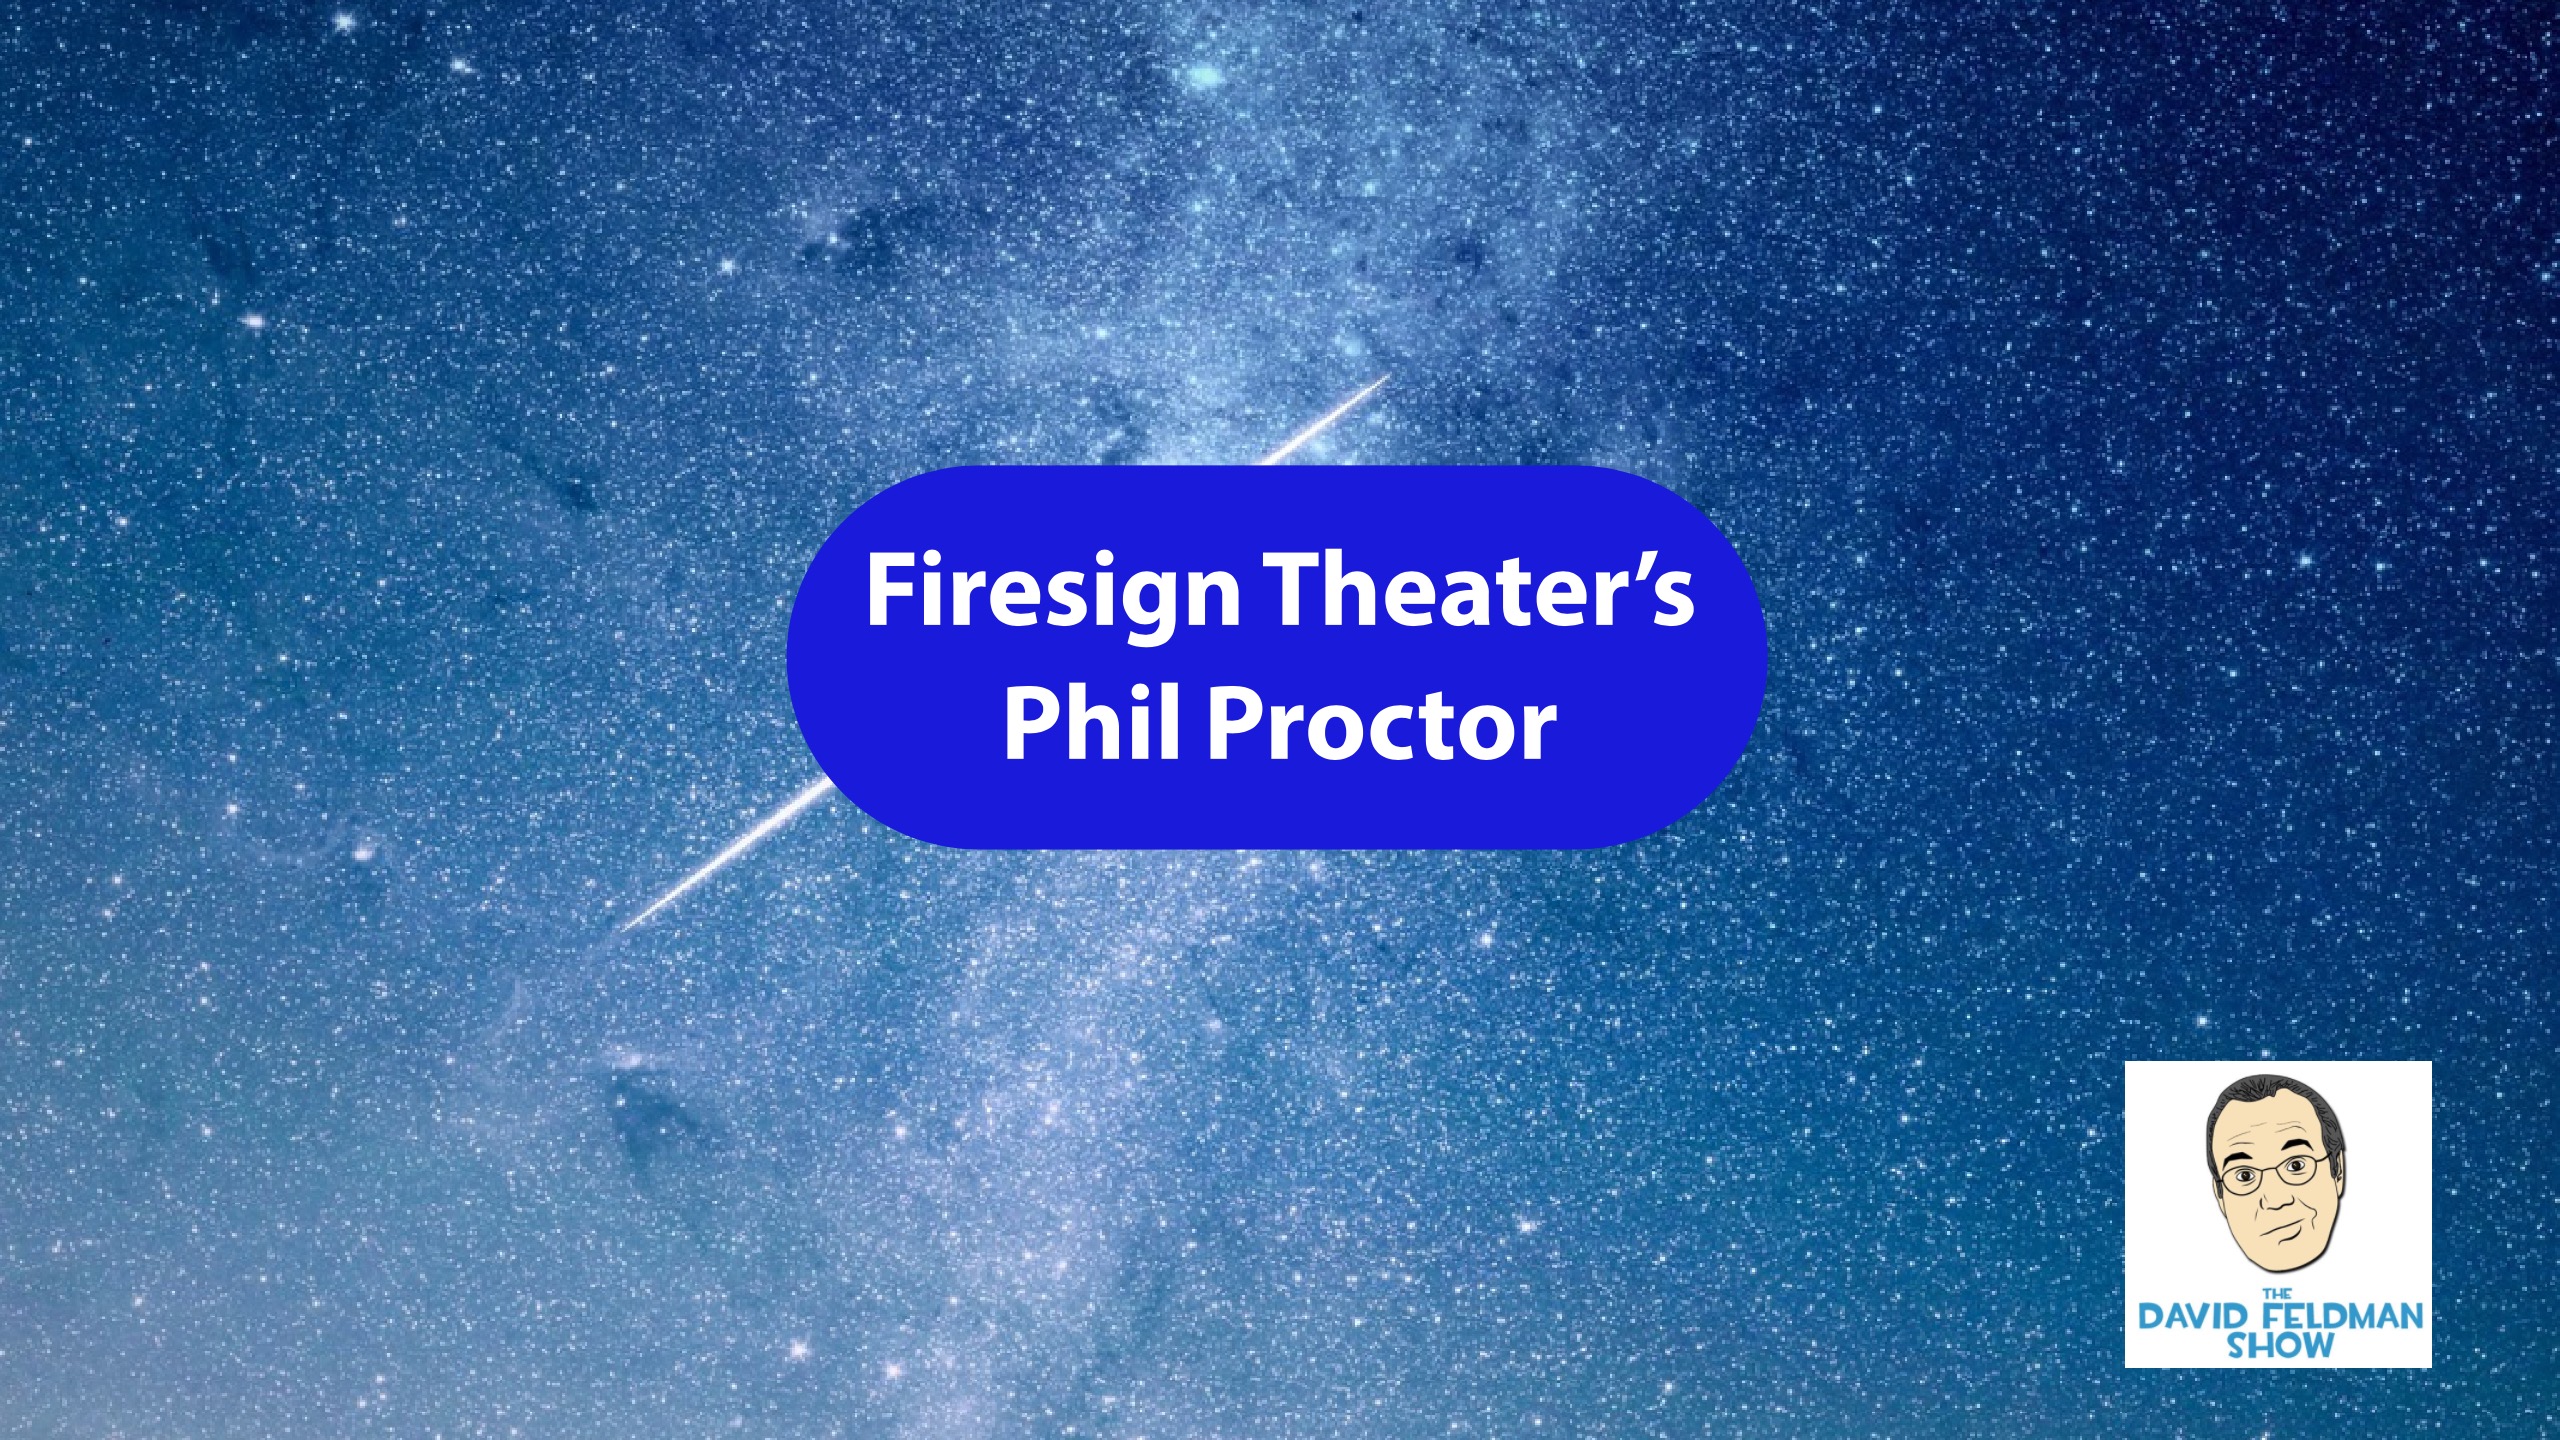 Firesign Theater's Phil Proctor